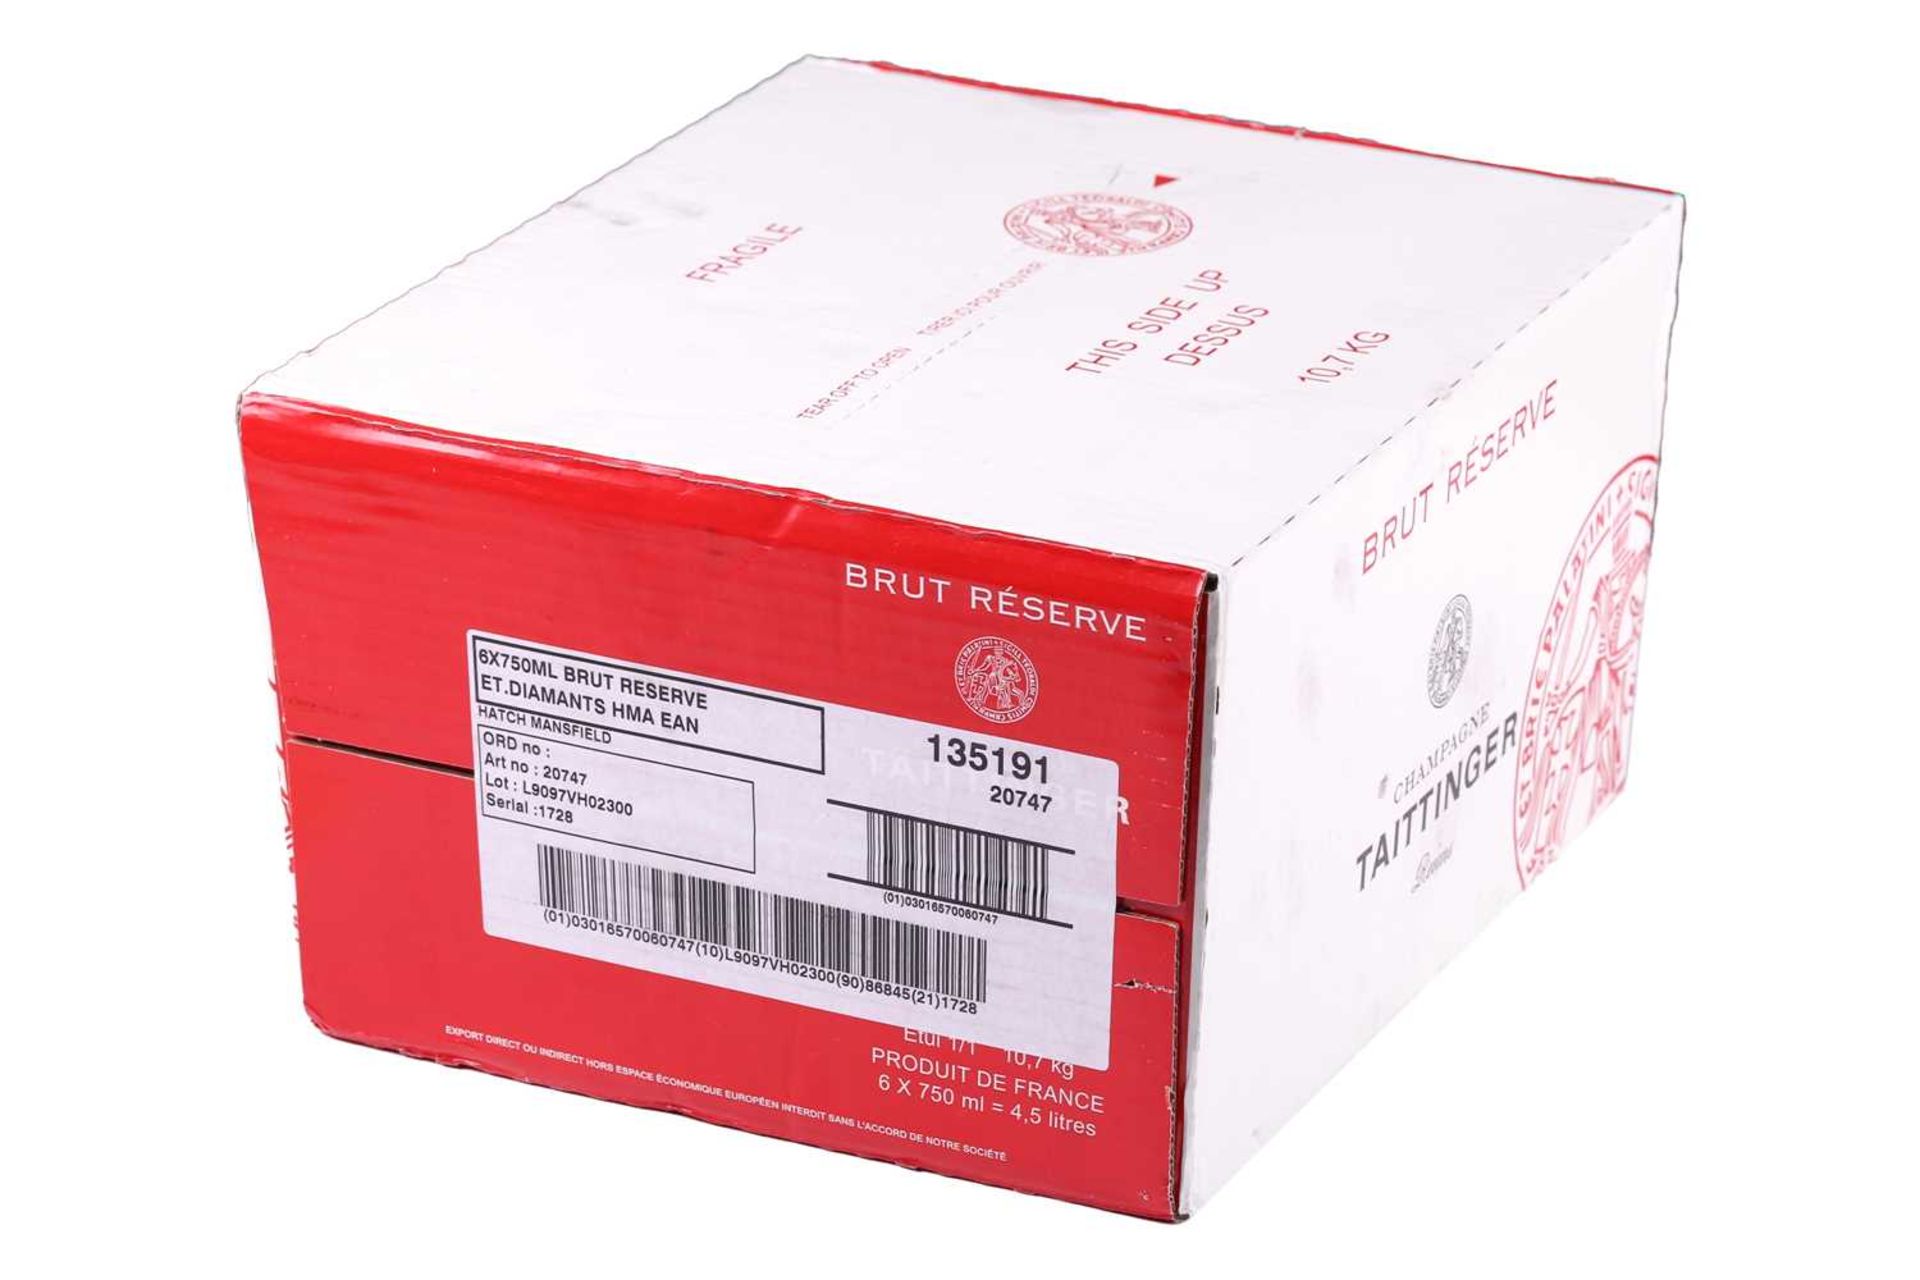 Six bottles of Taittinger Brut Reserve Champagne, 750ml in an unopened carton.Private collector in